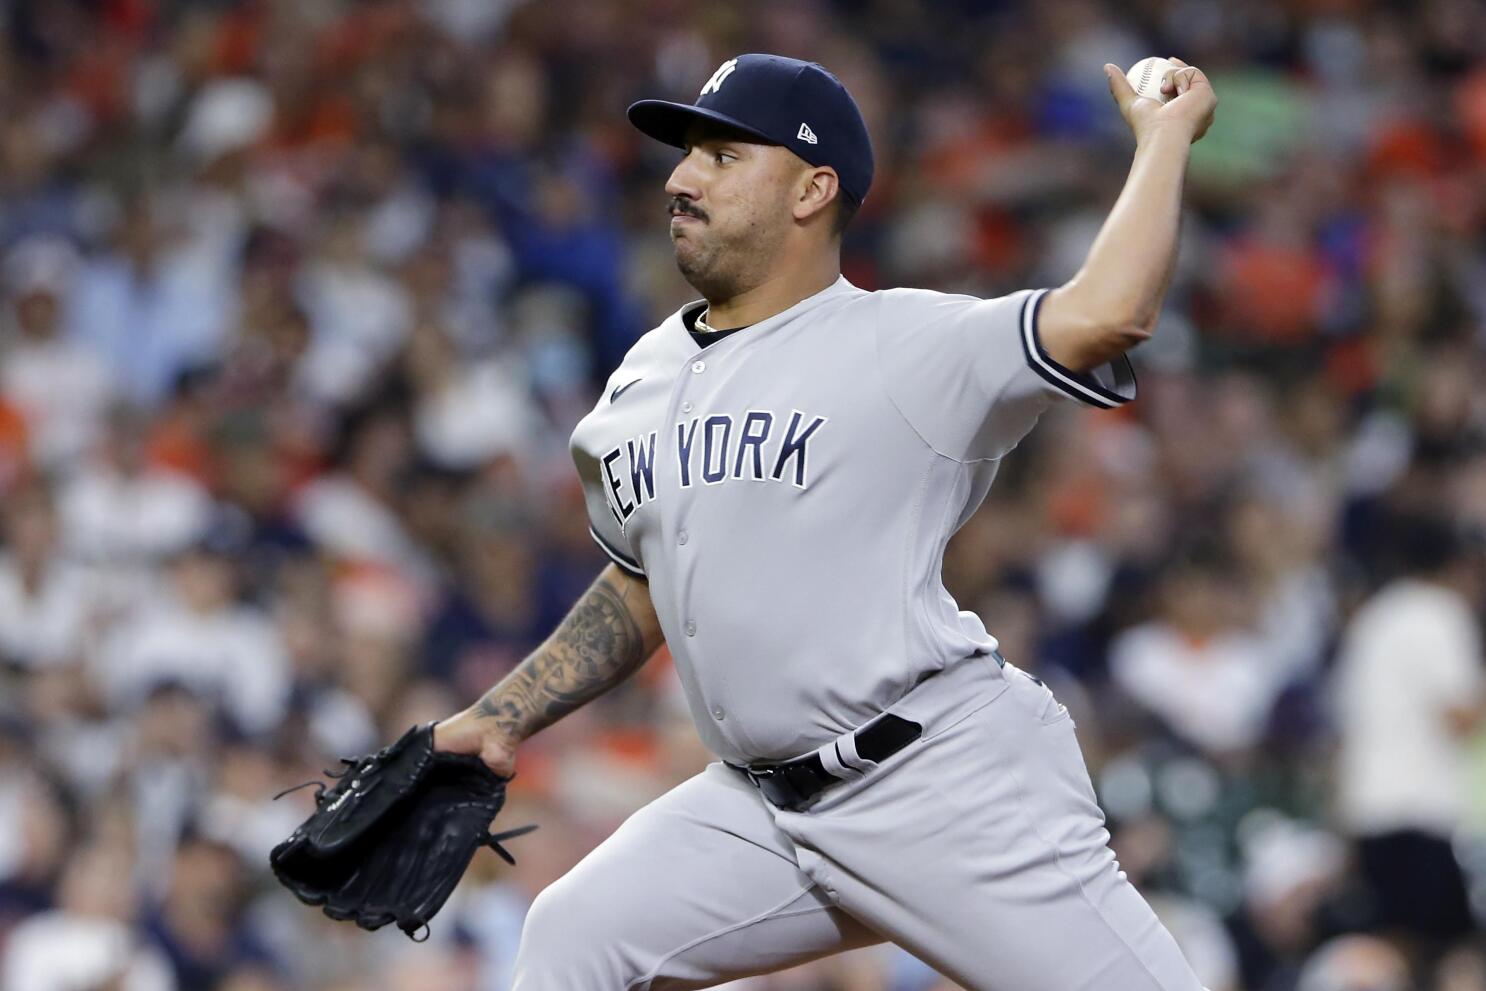 Cortes, 3 relievers shut down Astros in Yankees' 4-0 win